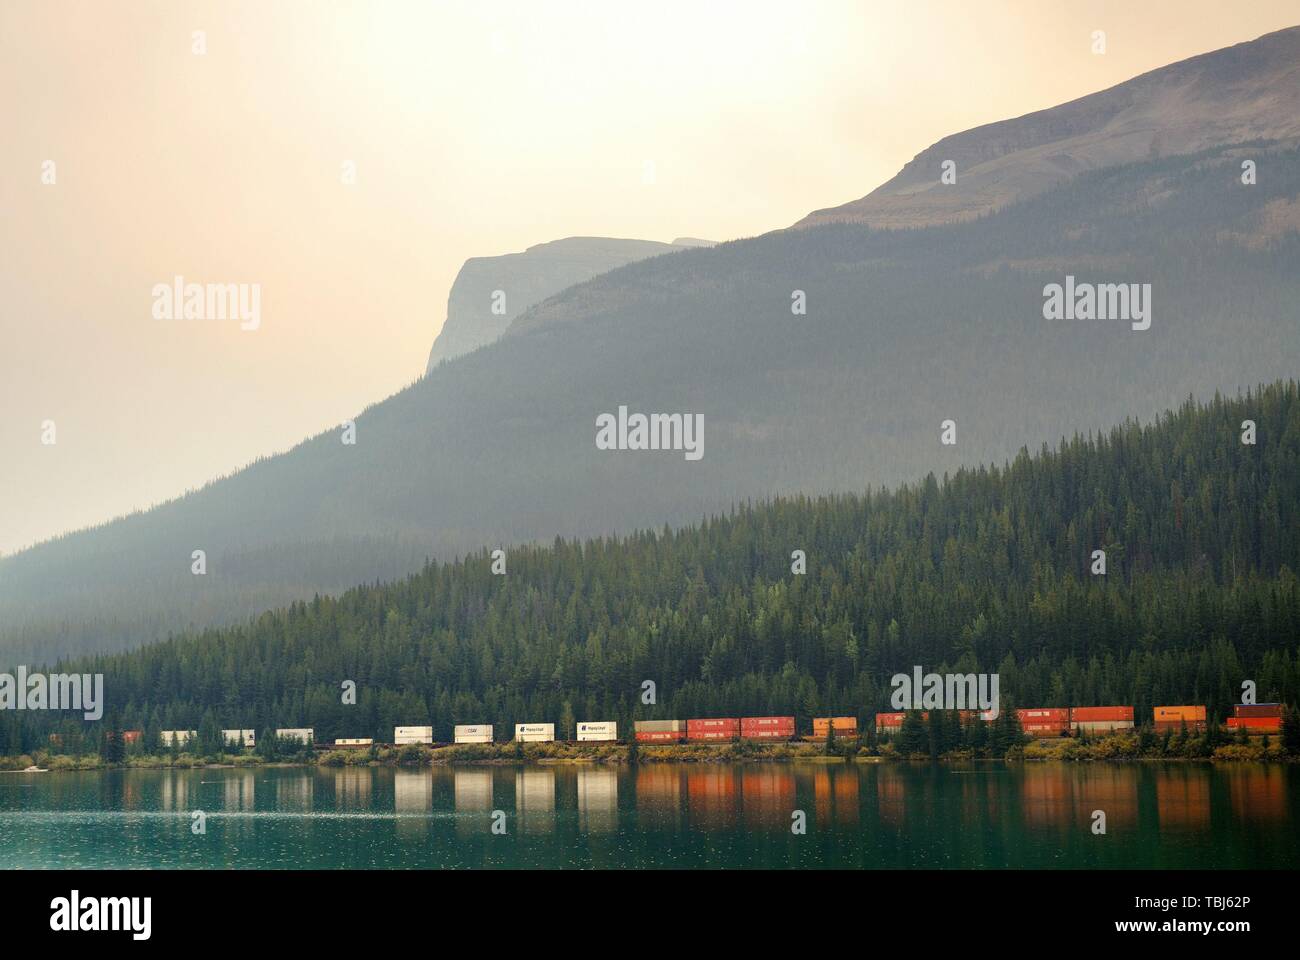 BANFF, CANADA - AUGUST 27: Cargo train lake and mountain on August 27, 2015 in Banff National Park, Canada. Established in 1885, it is the oldest park in Canada. Stock Photo